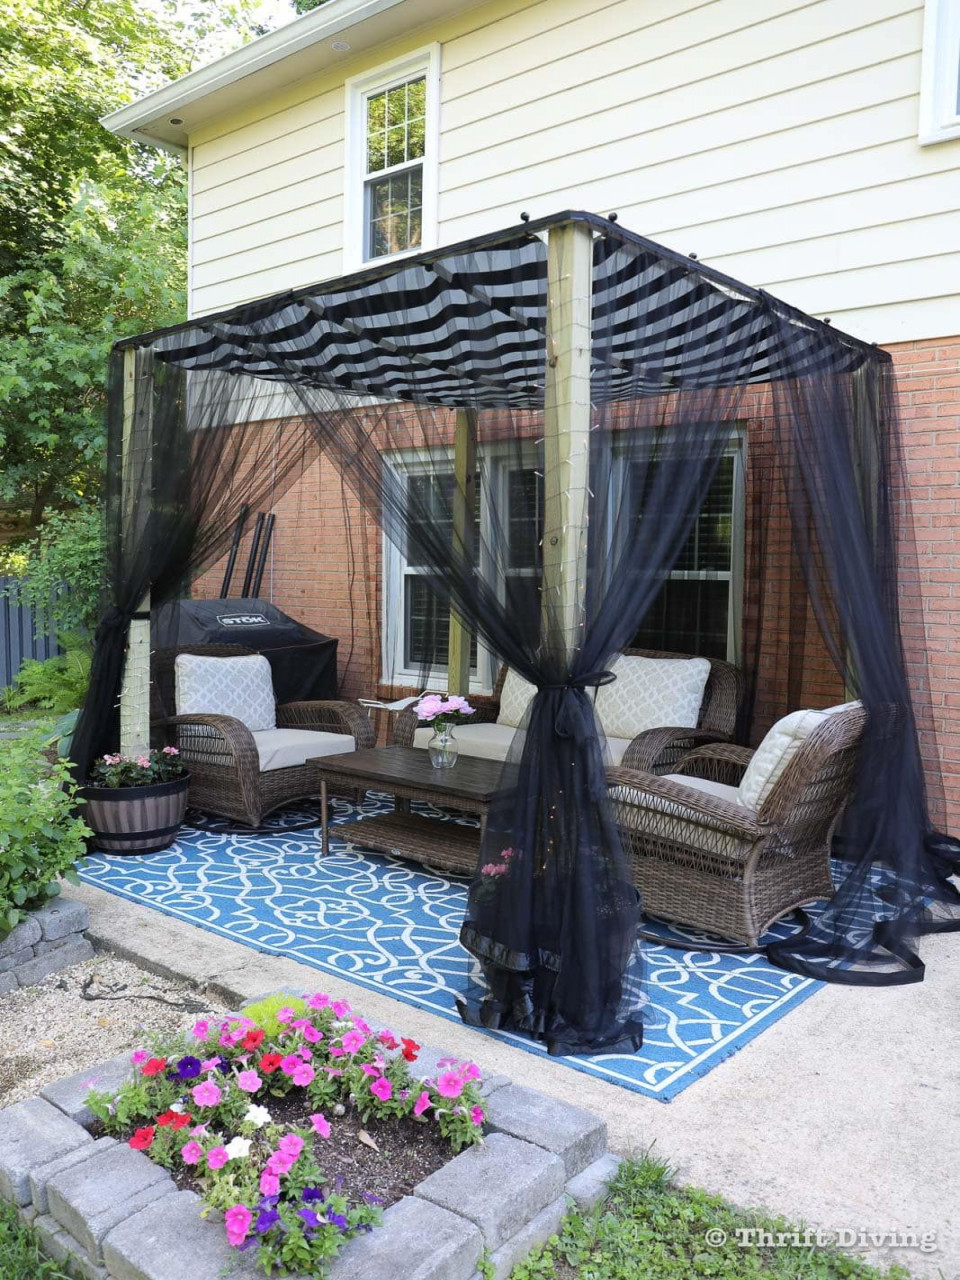 Best Patio Cover Ideas - Covered Patio Designs